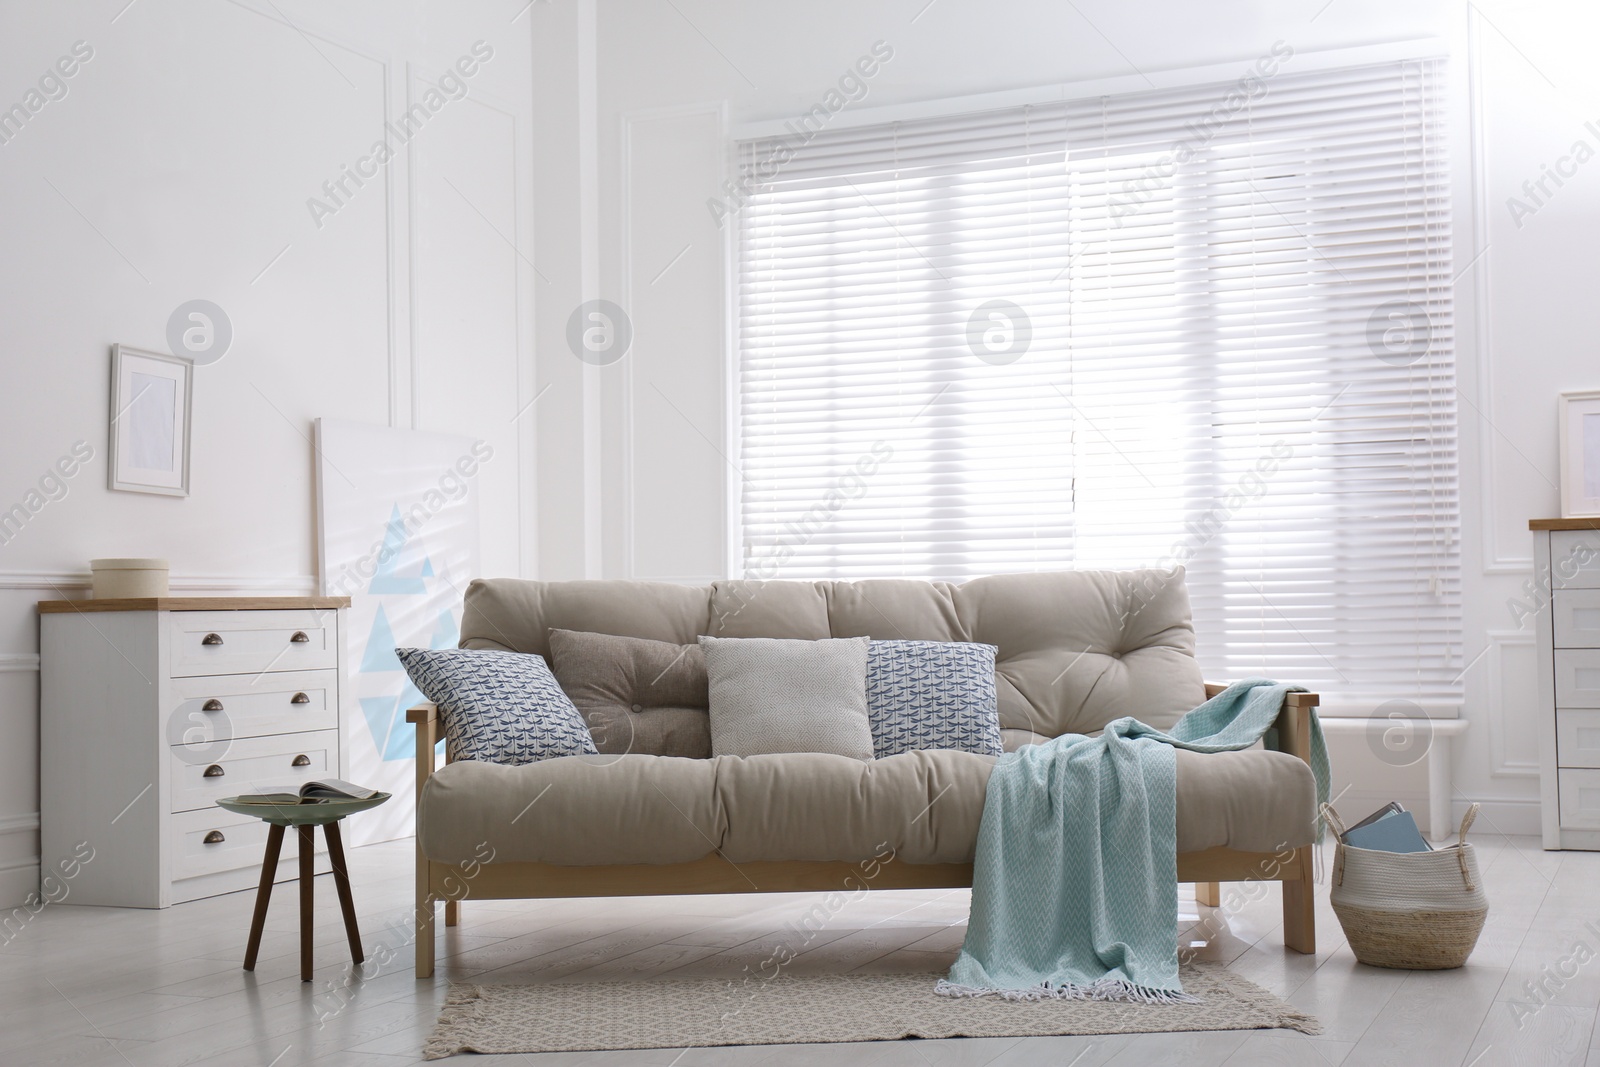 Photo of Stylish living room interior with comfortable sofa and chest of drawers